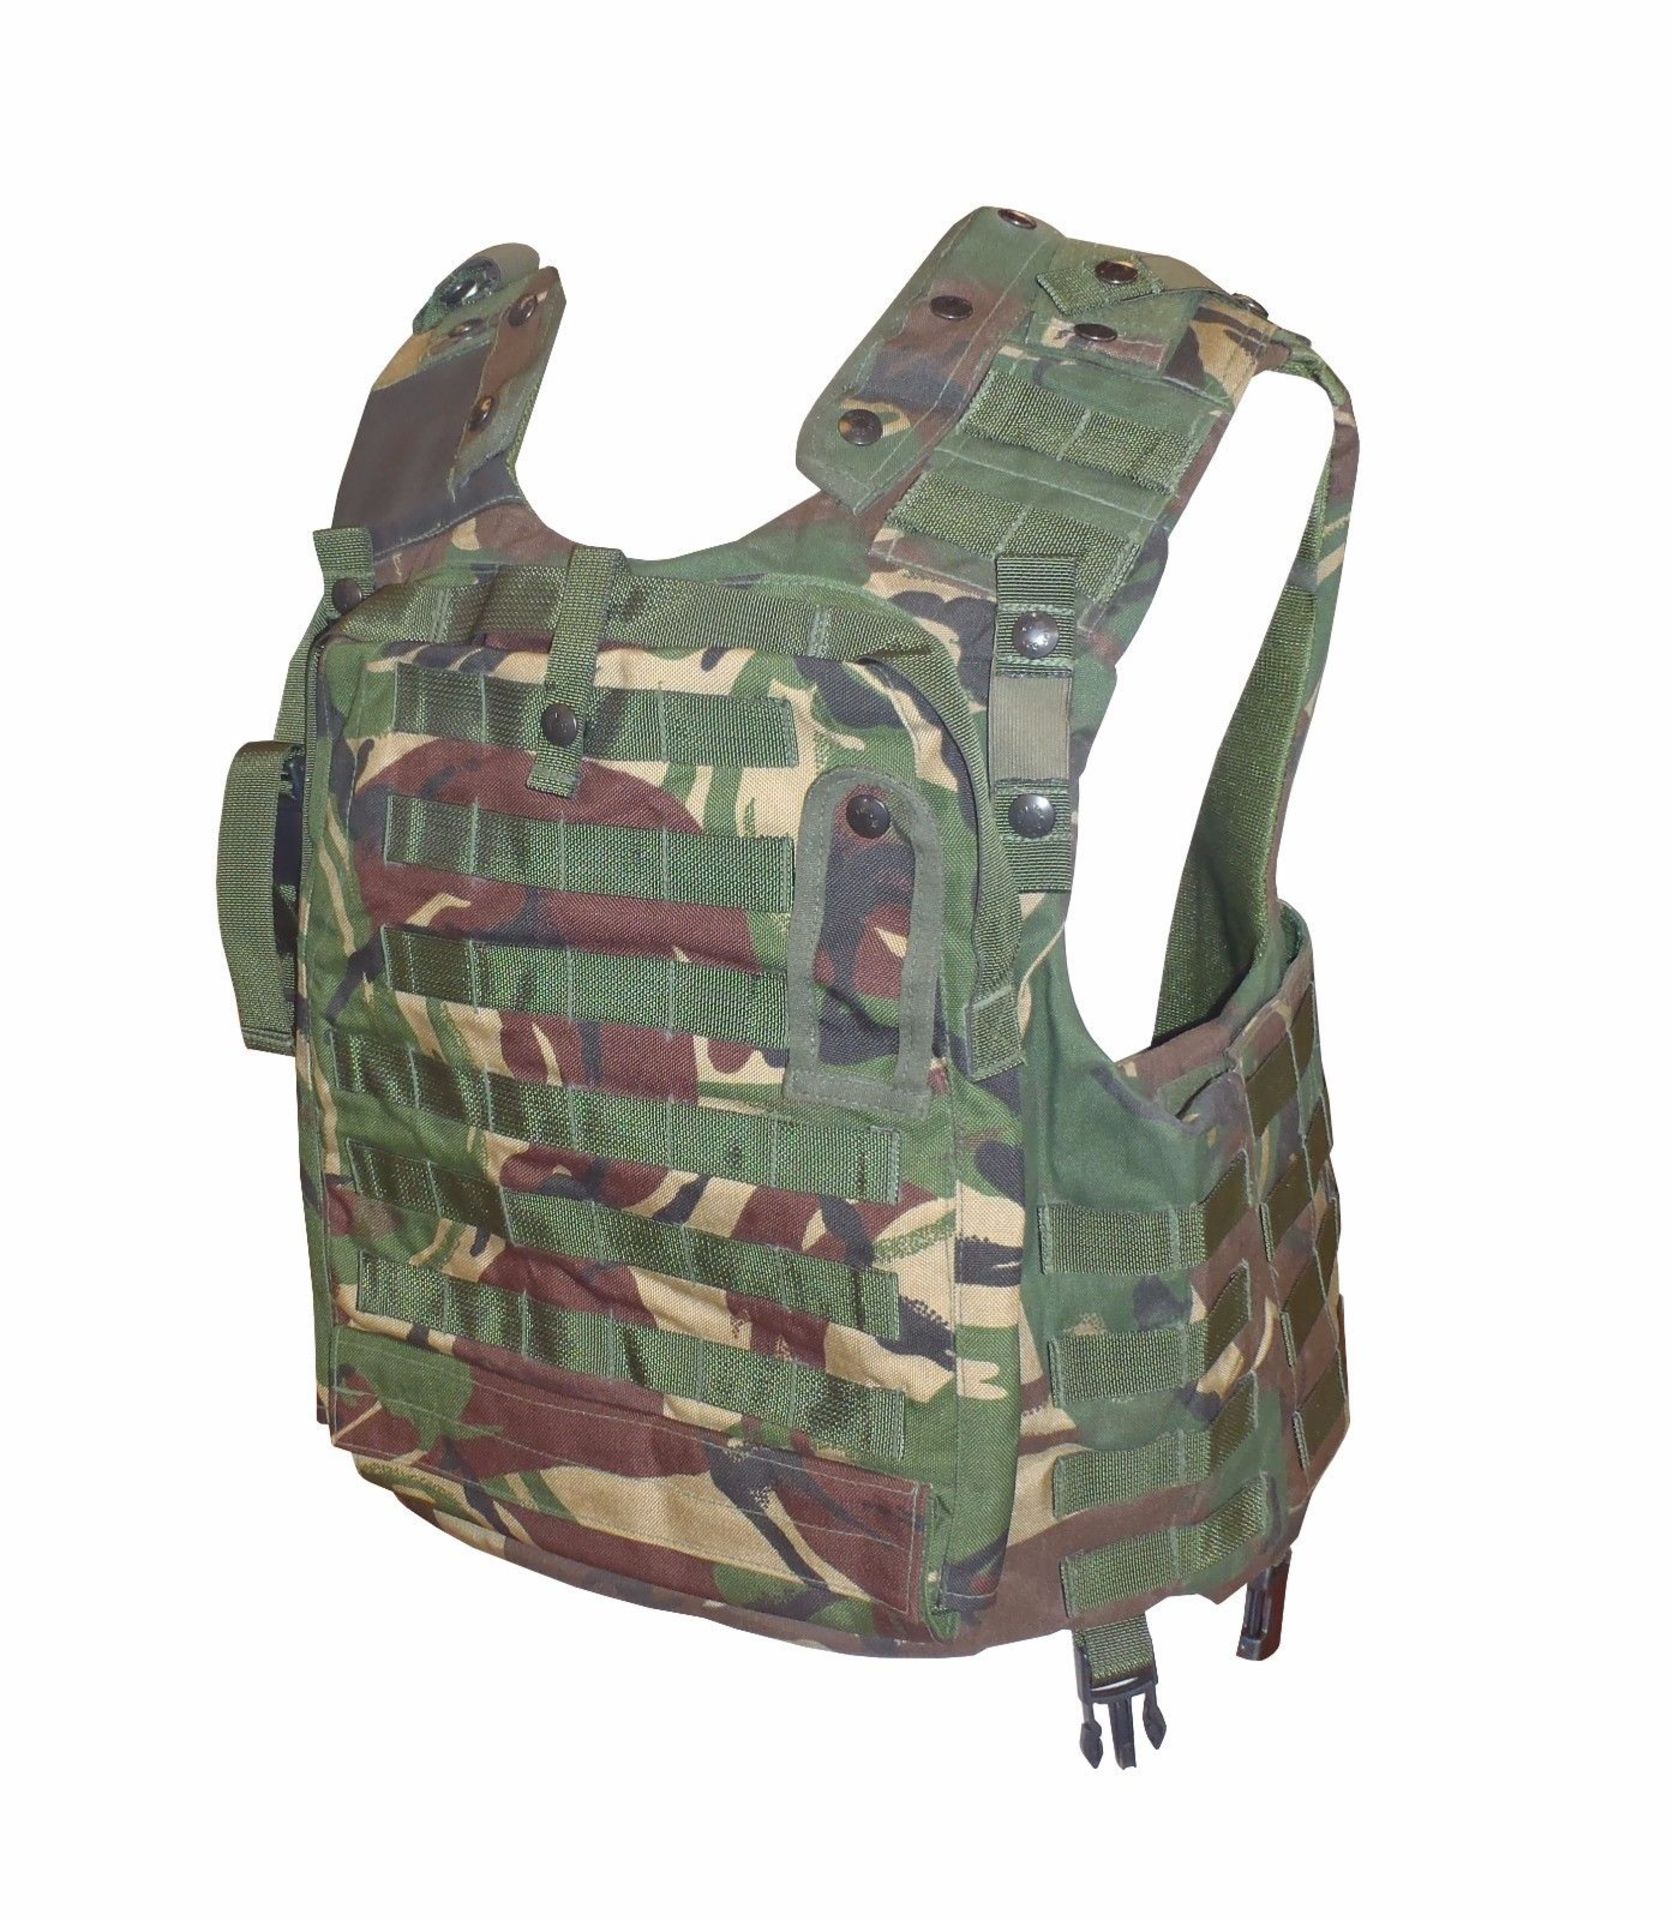 PACK OF 10 - DPM OSPREY - USED - MIX OF SIZES